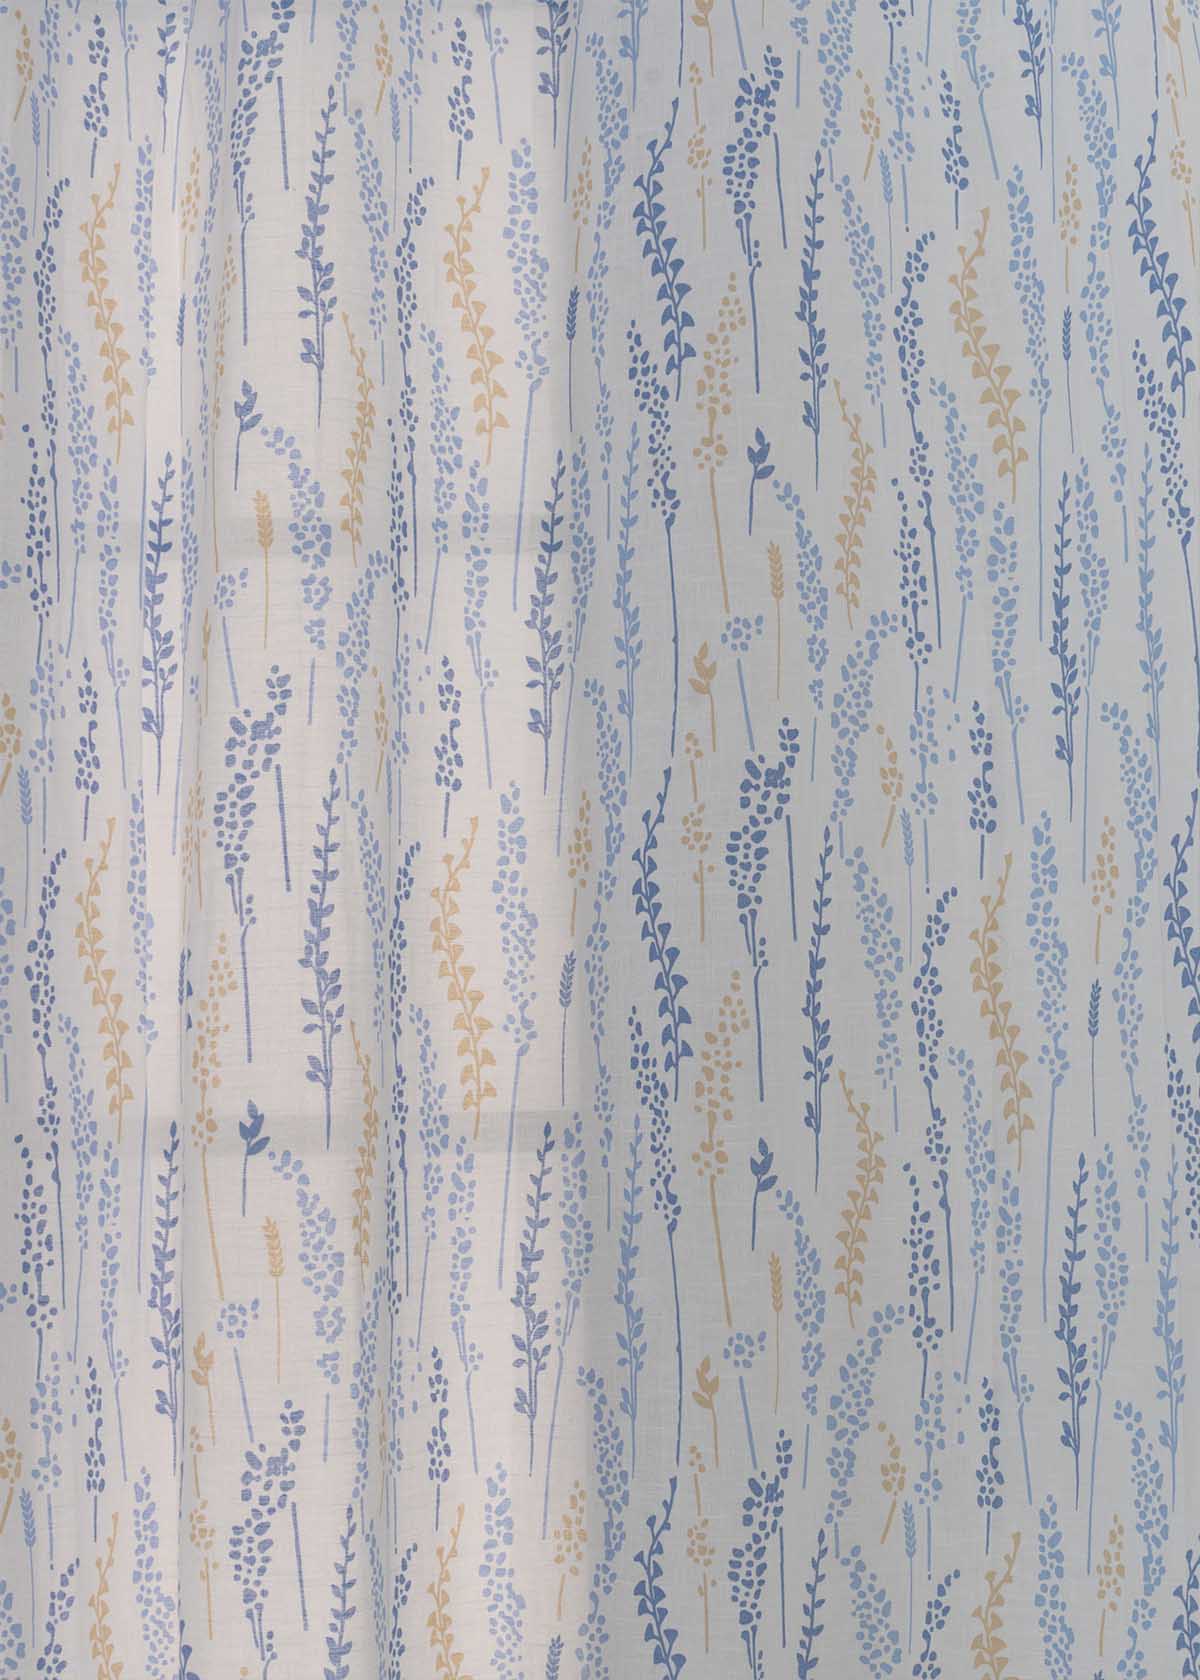 Grass fileds  100% cotton sheer floral curtain for living room -  Light filtering - Blue - Pack of 1